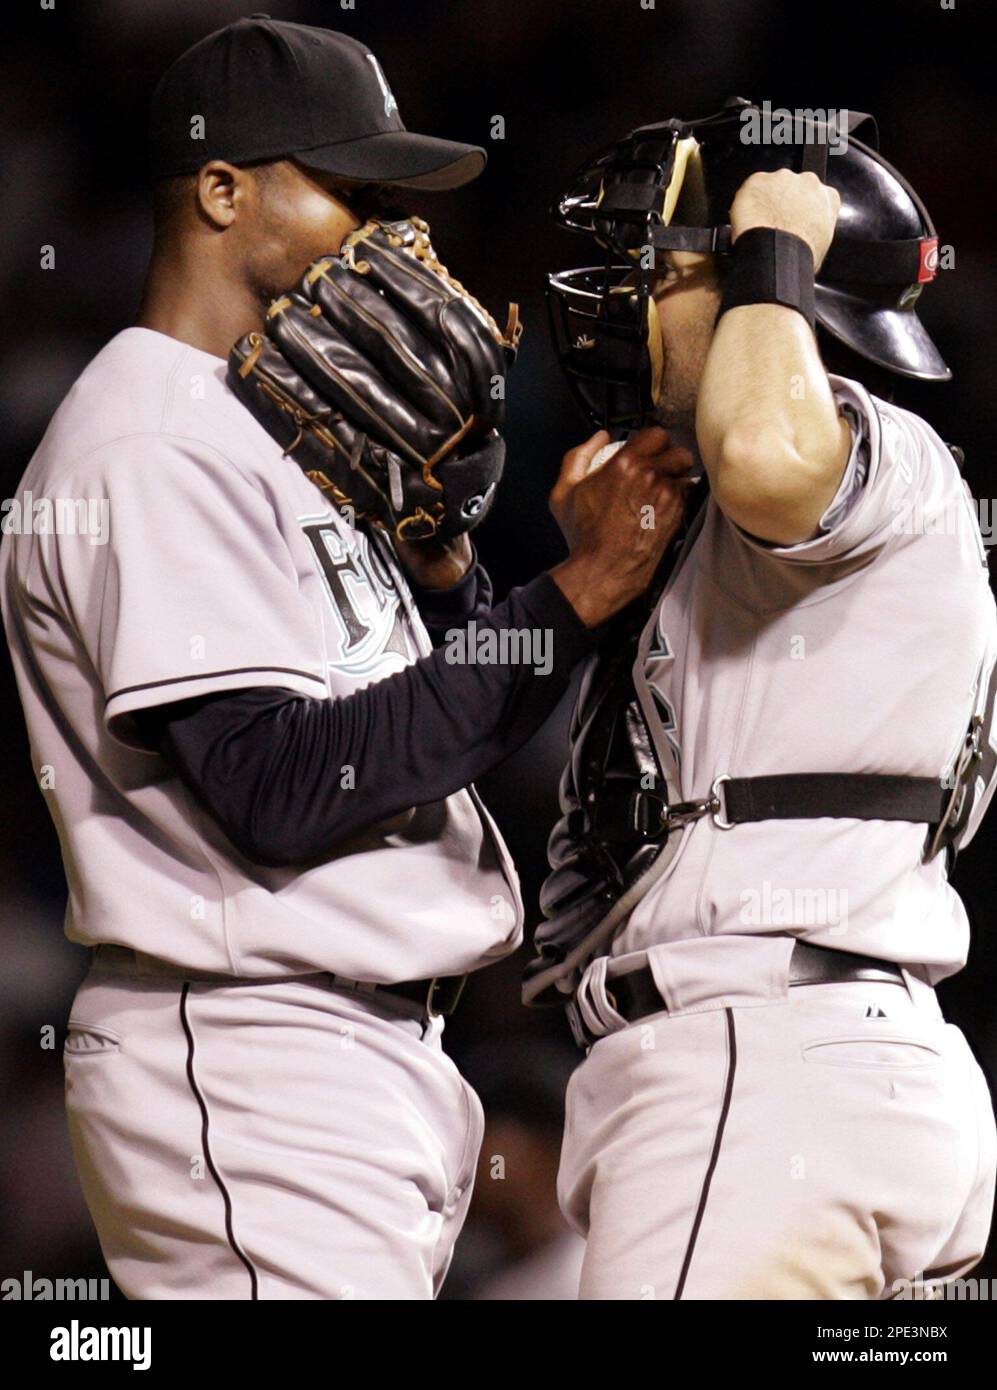 Florida Marlins relief pitcher Guillermo Mota, left, talks to catcher Paul  Lo Duca in the ninth inning against Chicago Cubs at Wrigley Field, Monday,  June 13, 2005 in Chicago. The Marlins won